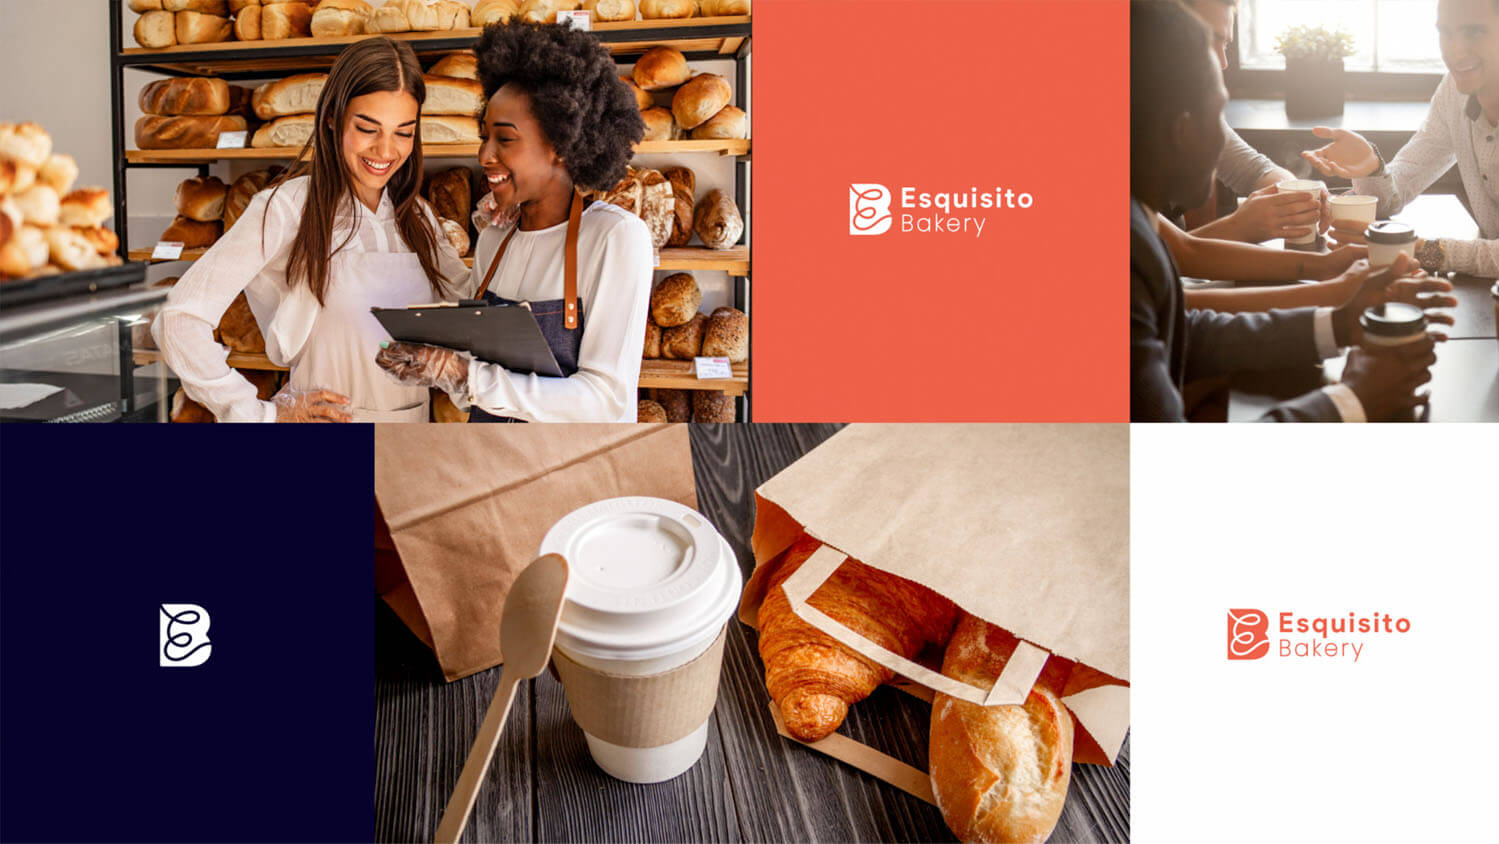 A rebranding image board for Esquisito Bakery showcasing their products and their new logo.